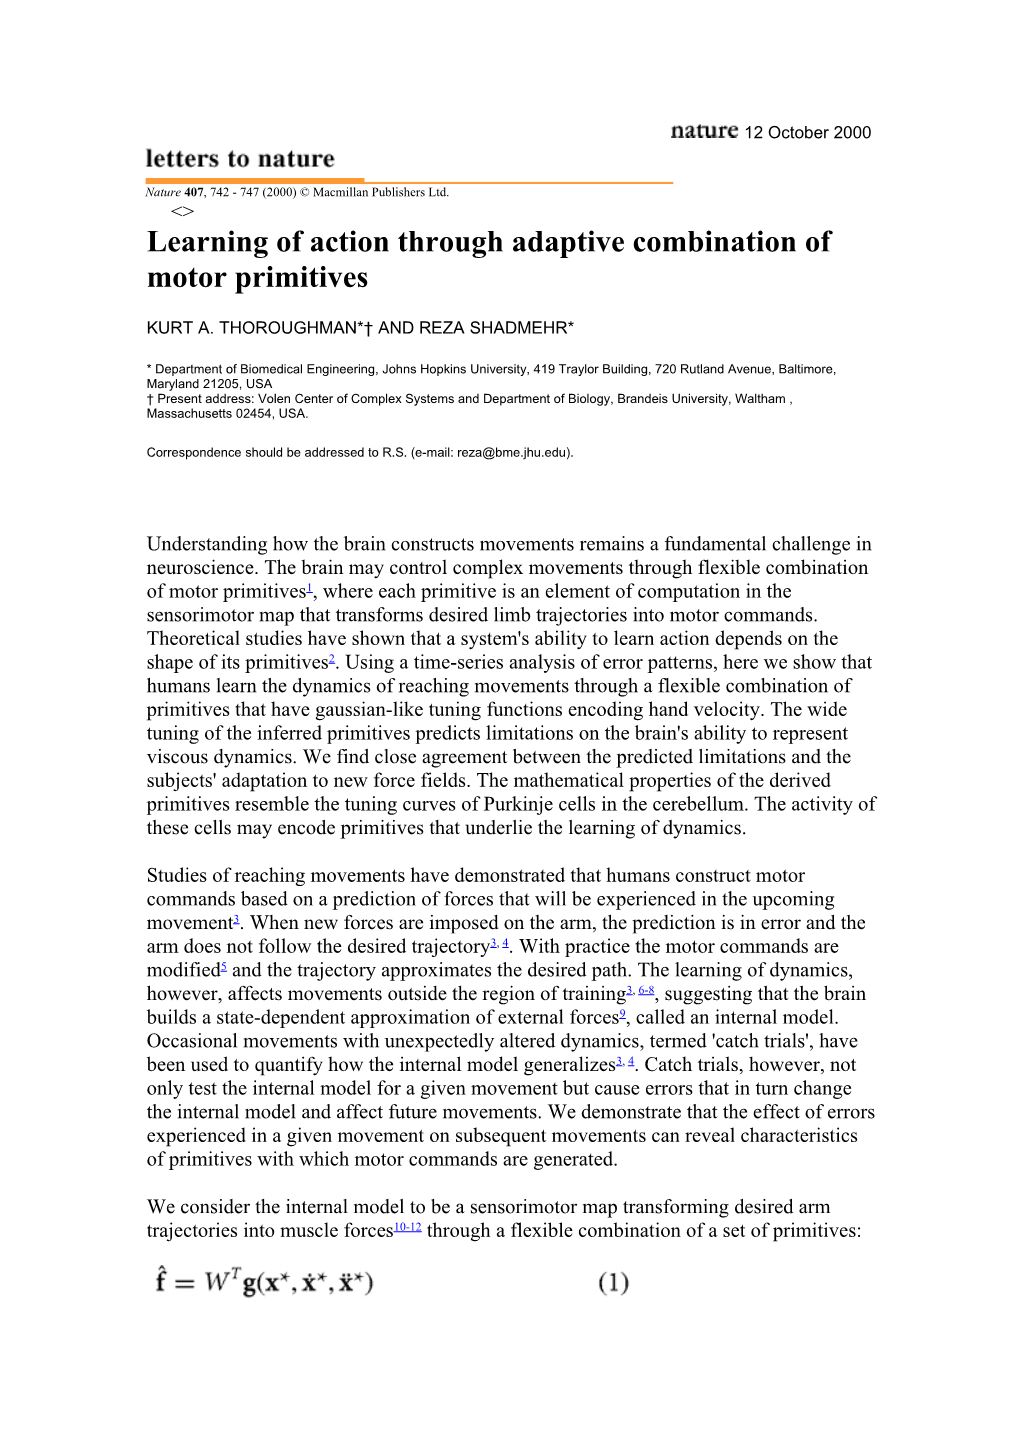 Learning of Action Through Adaptive Combination of Motor Primitives